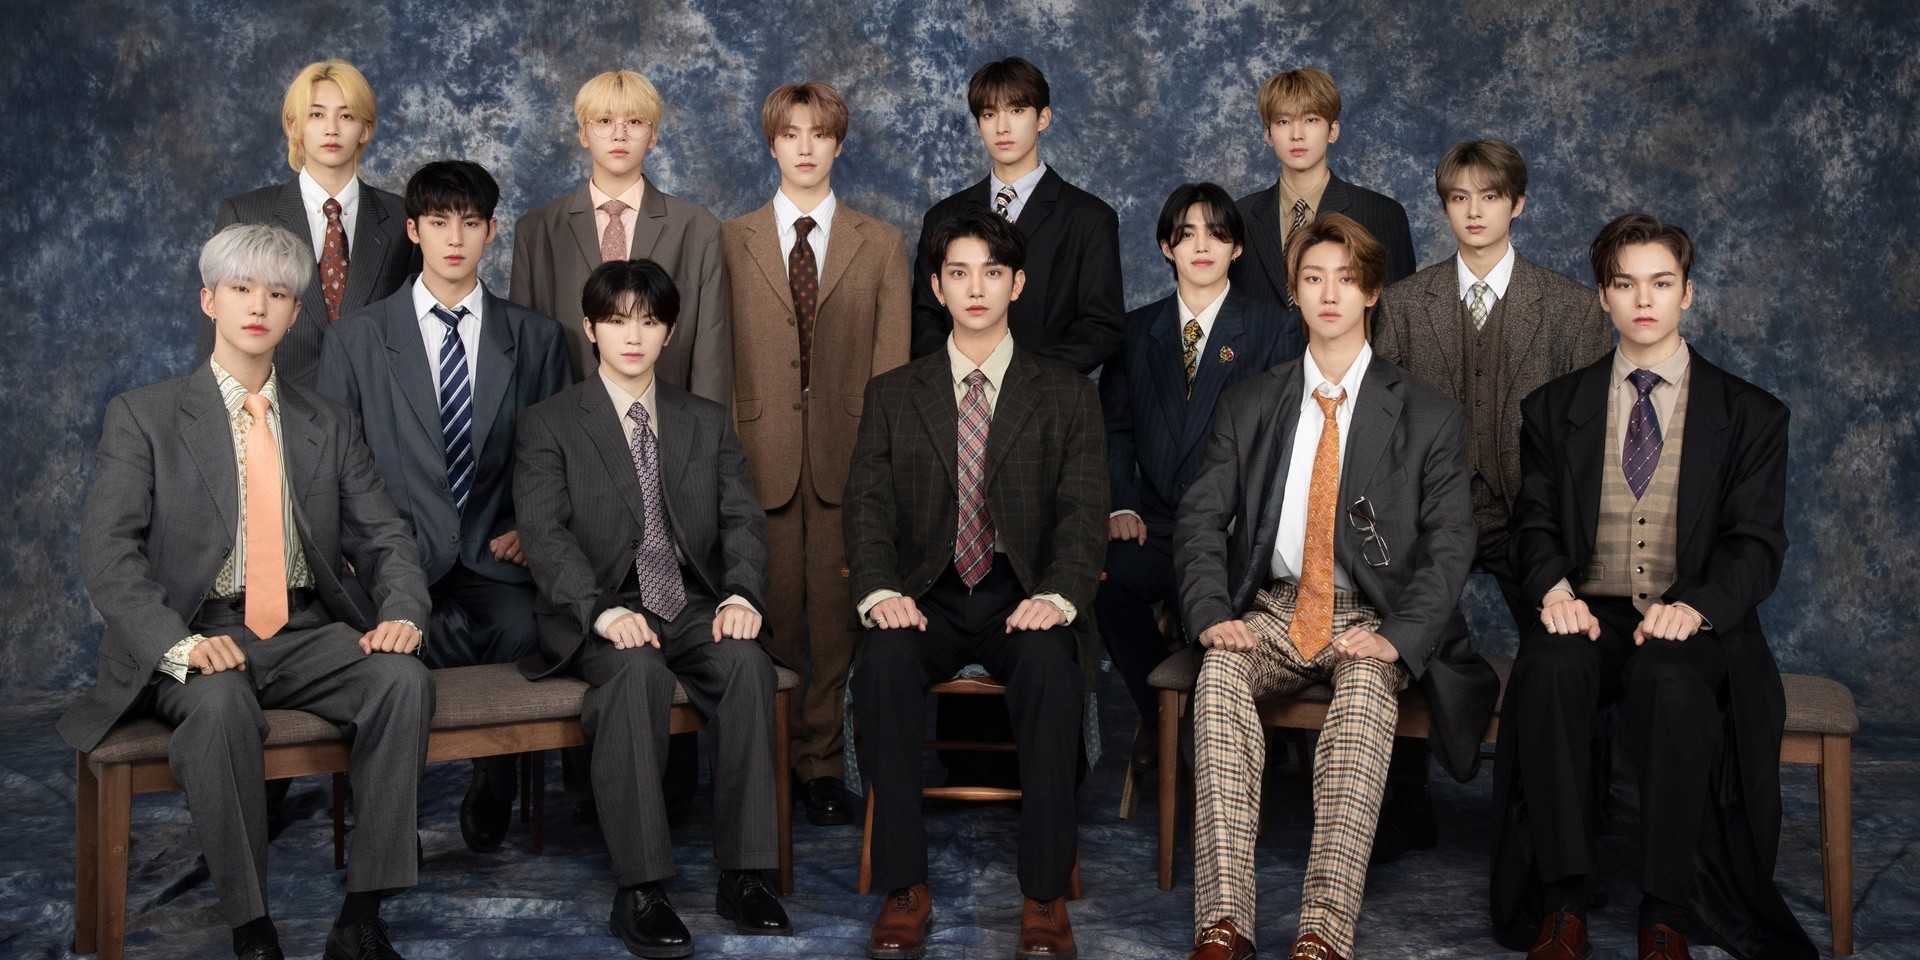 SEVENTEEN unveil an acoustic version of '겨우 (All My Love)', drop special merch drop for their 6th anniversary